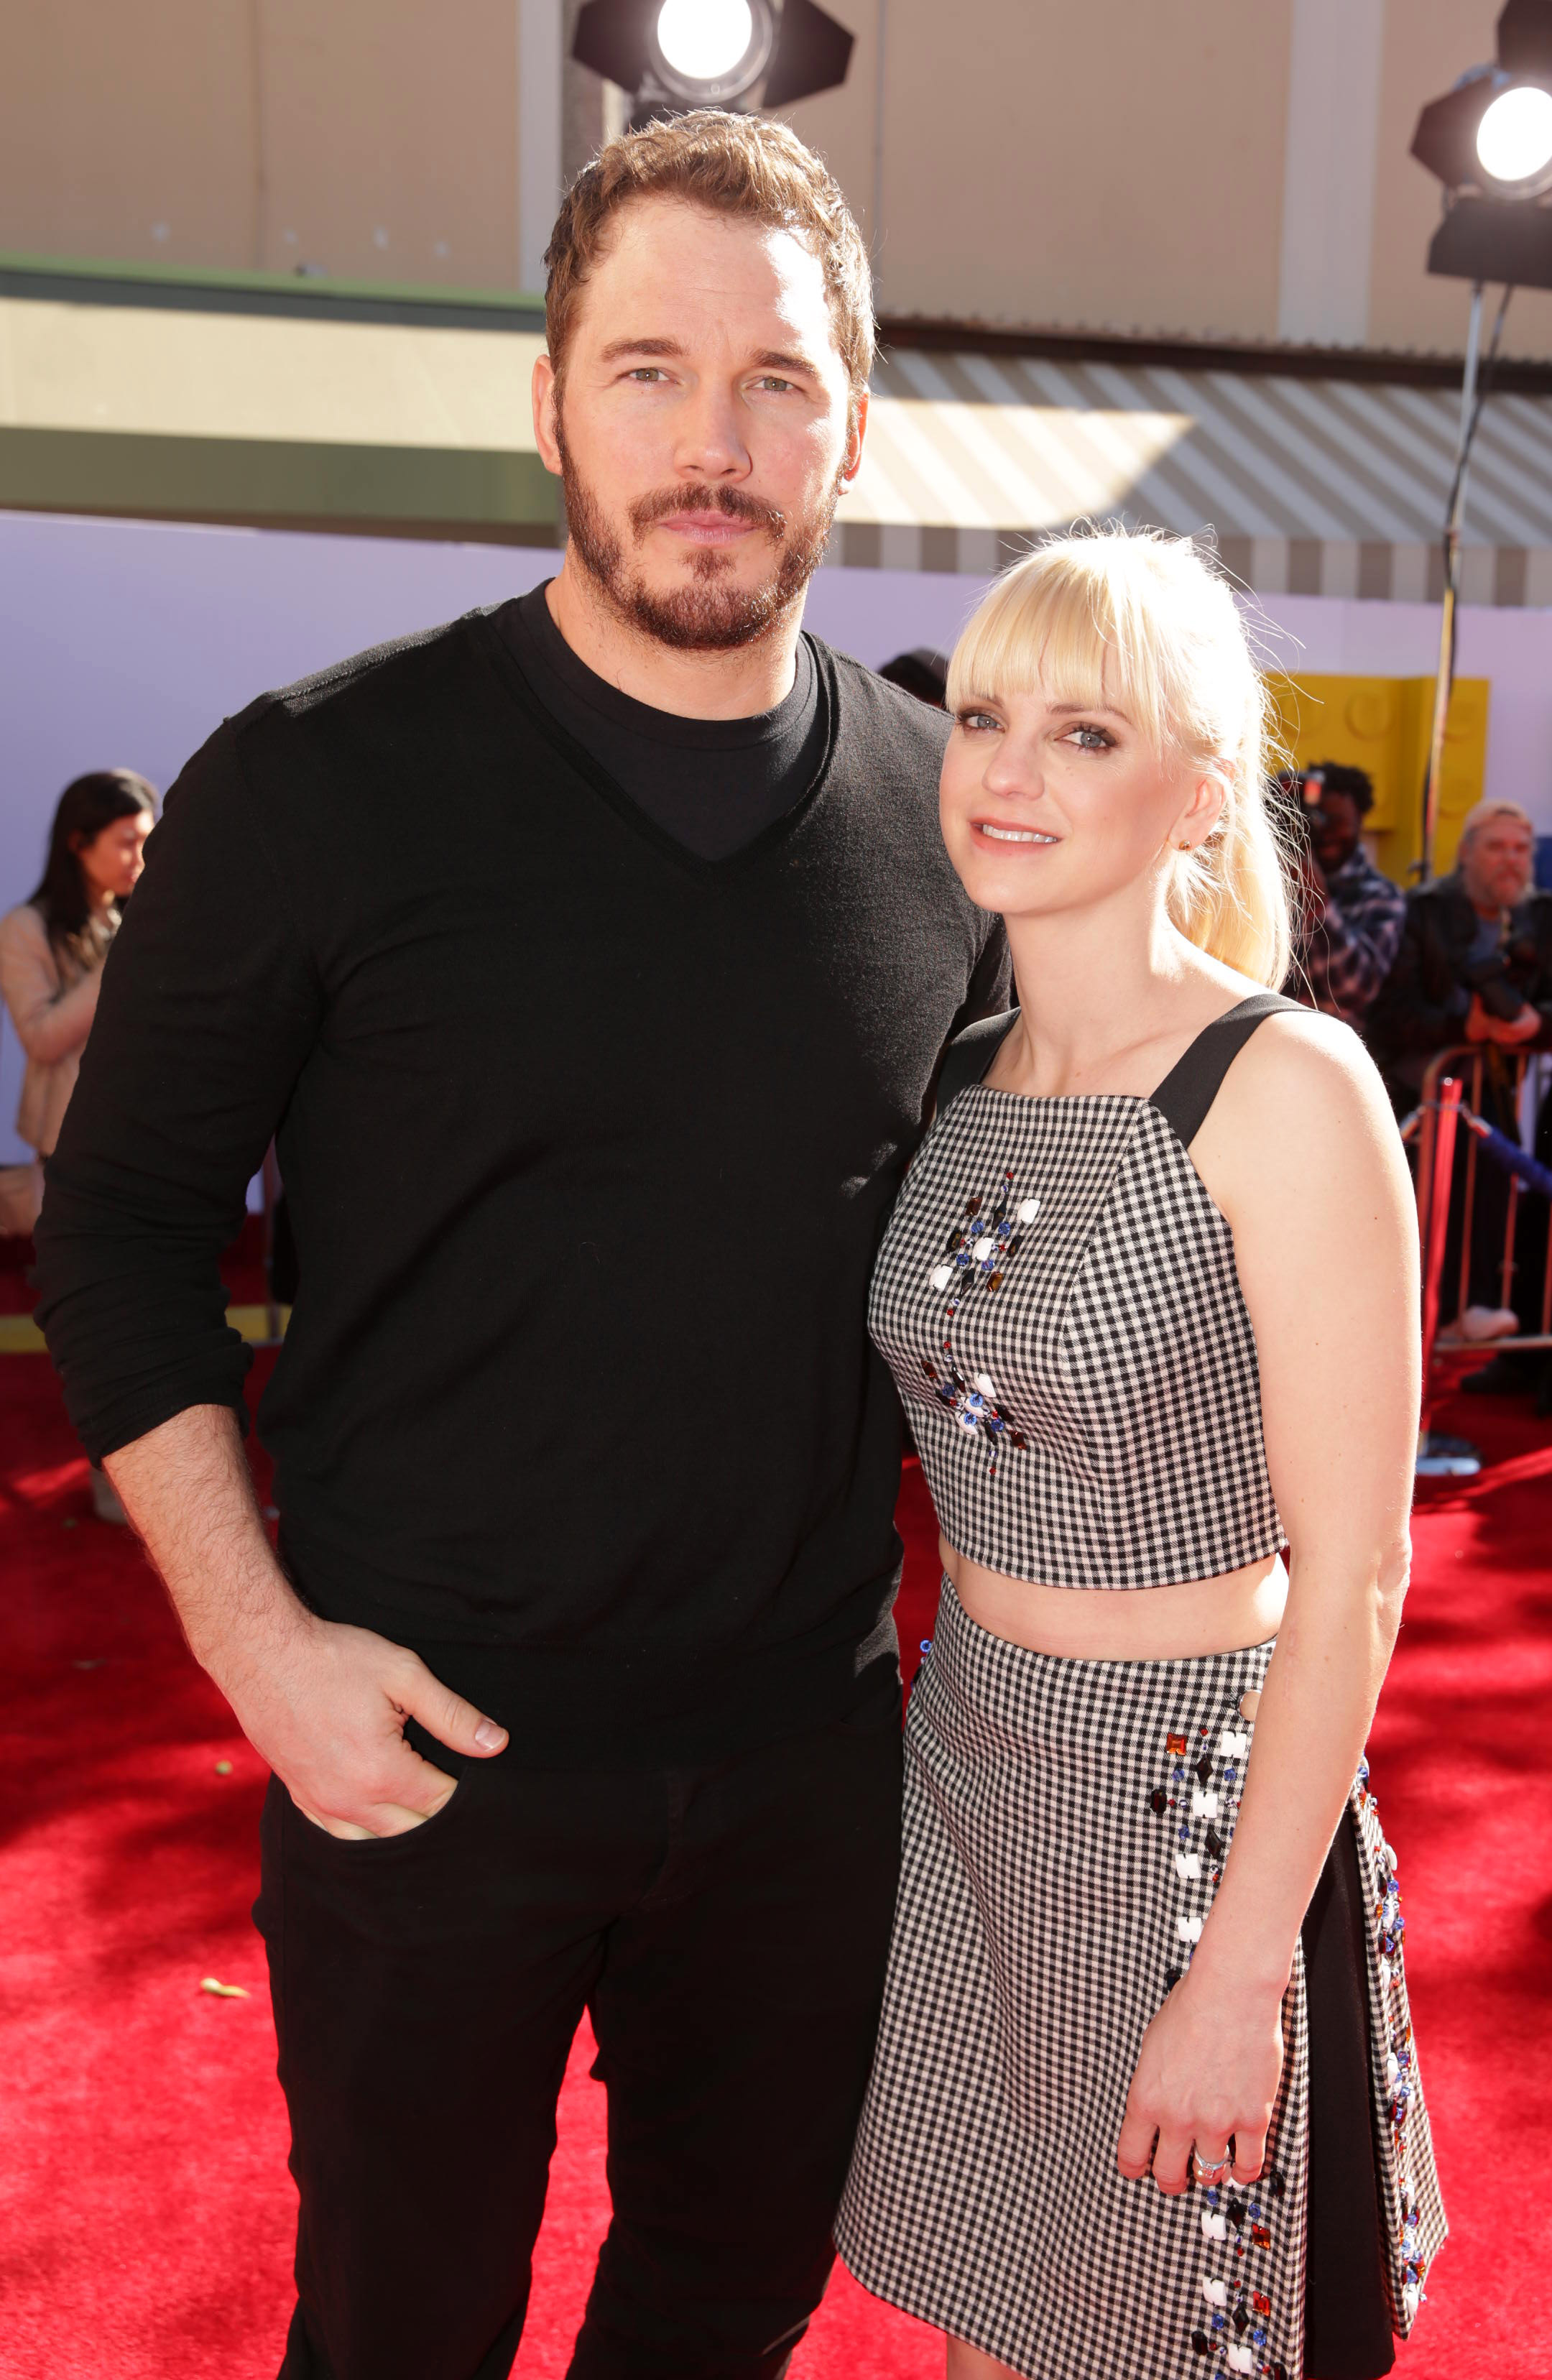 Chris Pratt and Anna Faris seen at Warner Bros. Pictures premiere of “The Lego Movie”, in Los Angeles, California on February 1, 2014. | Source: Getty Images